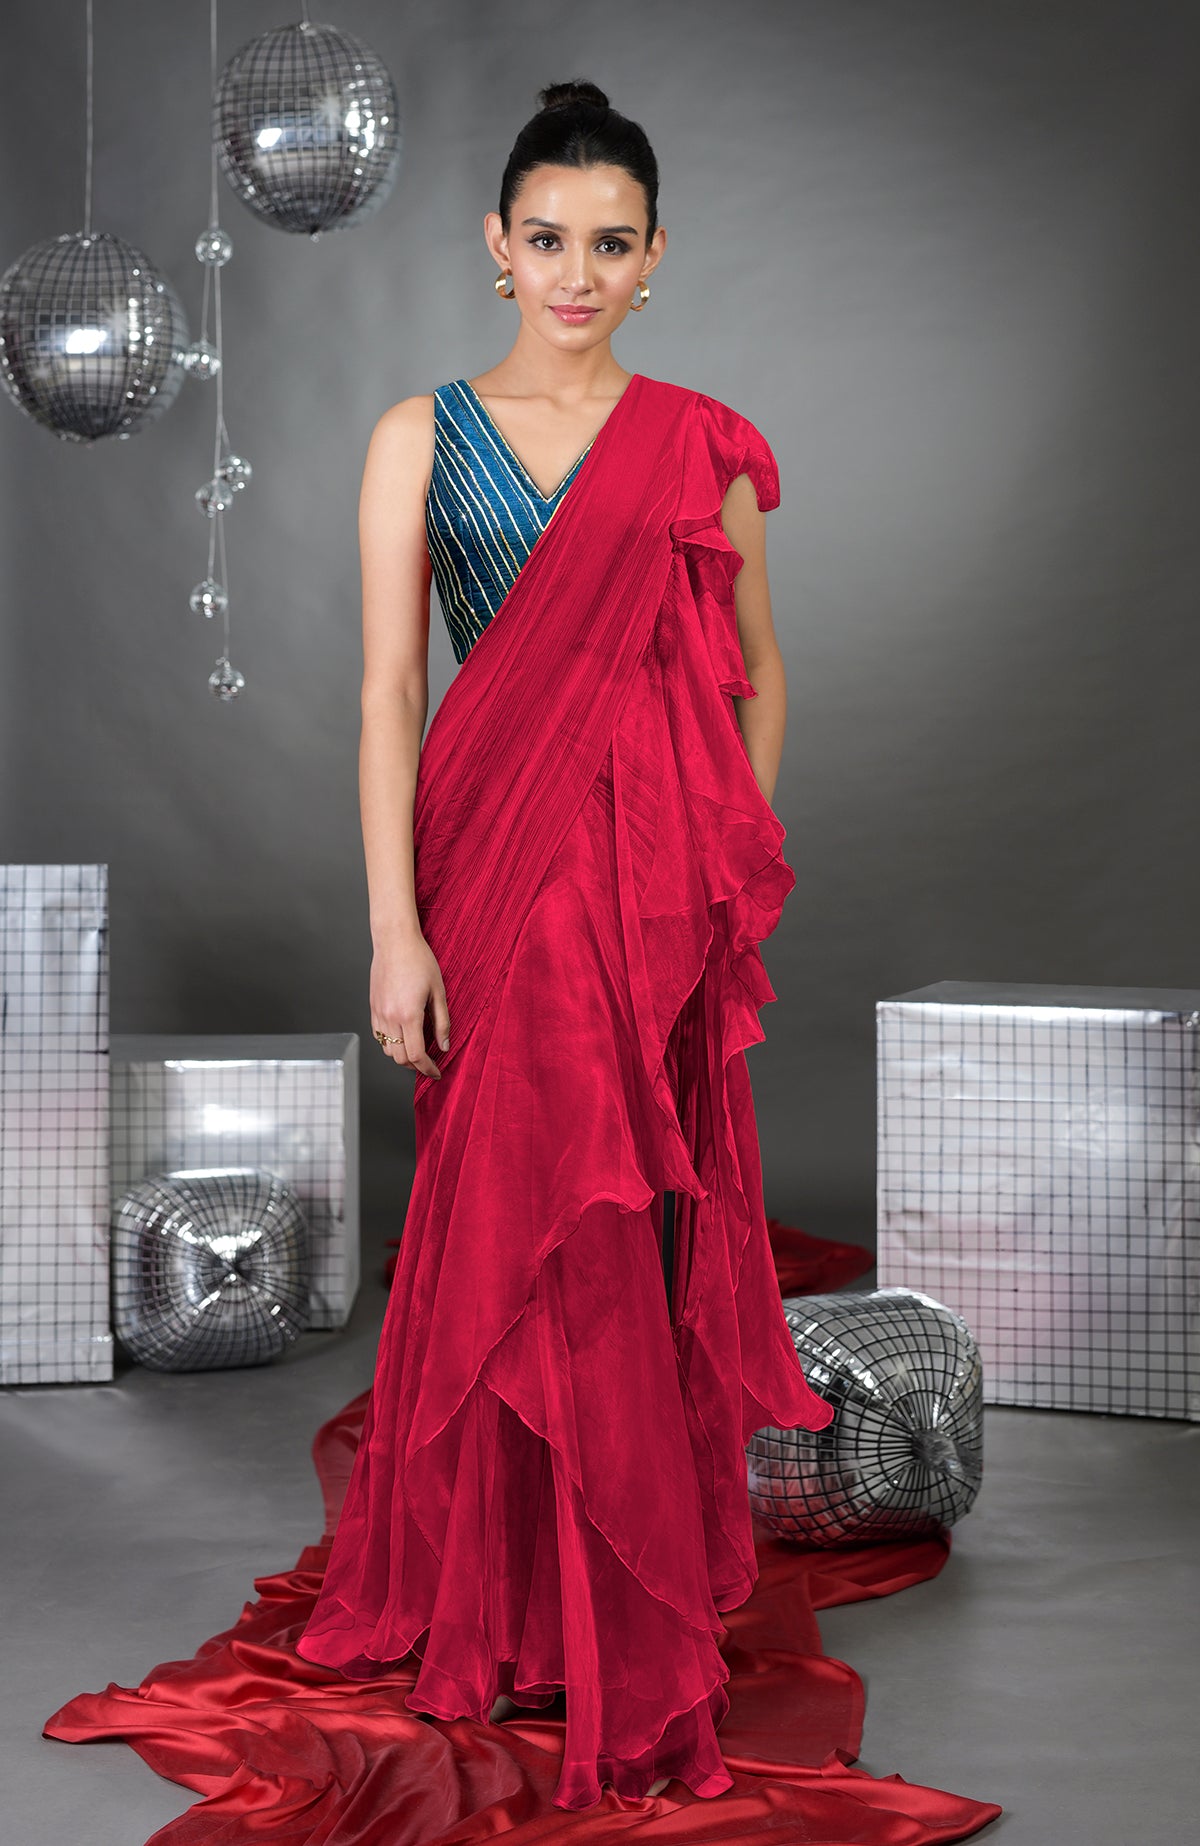 Buy Ruffle Saree With A Embroidered Blouse And Belt by Designer TARINI VIJ  for Women online at Kaarimarket.com